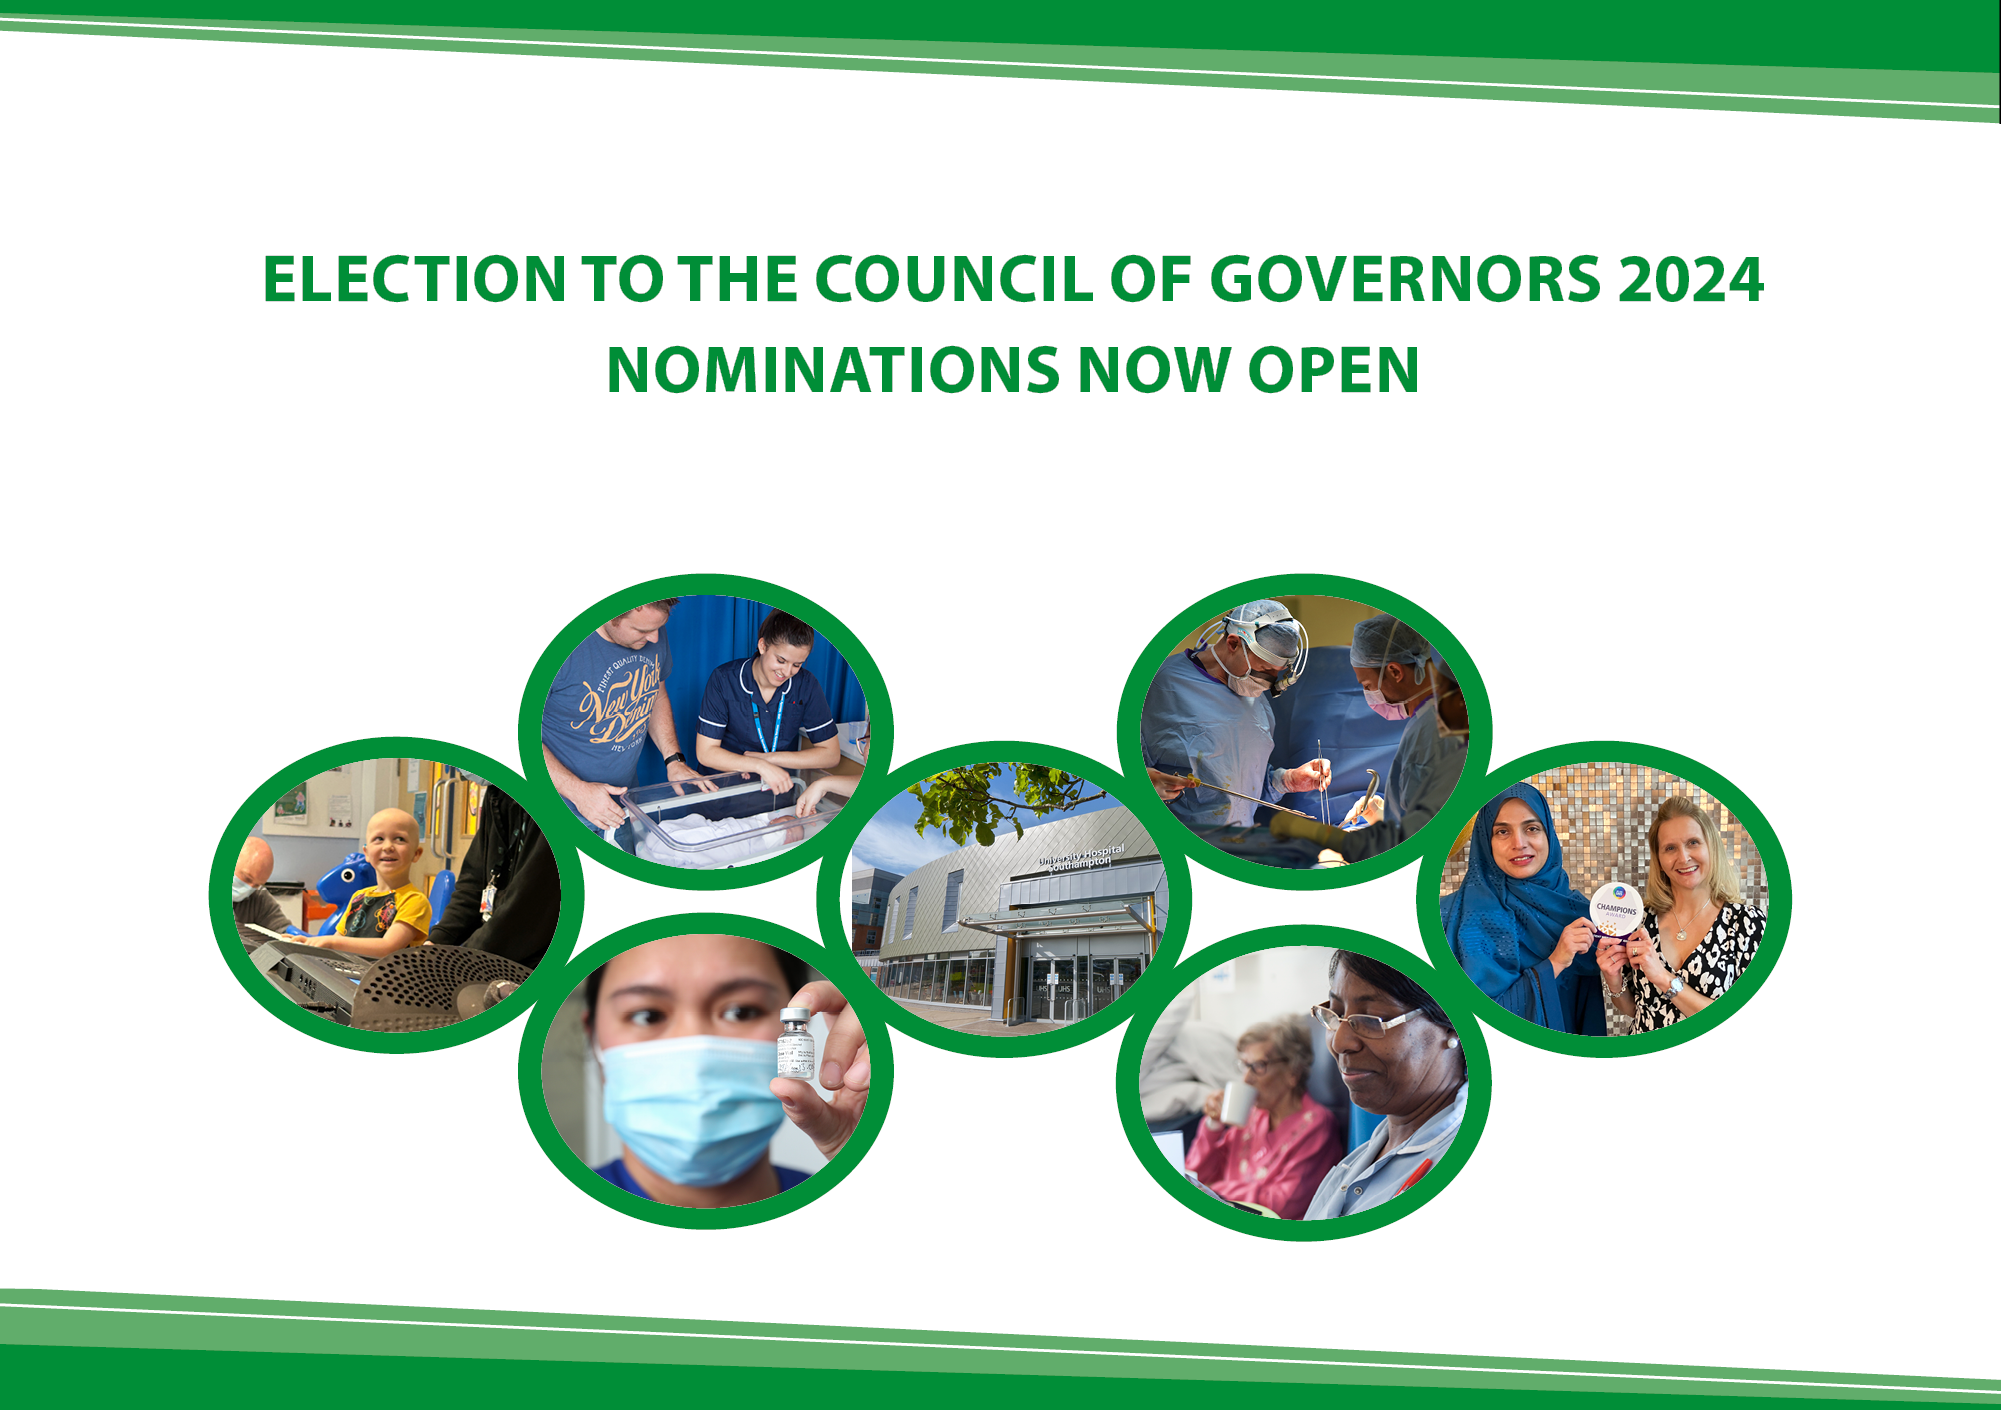 Election to the council of governors 2024 - nominations now open